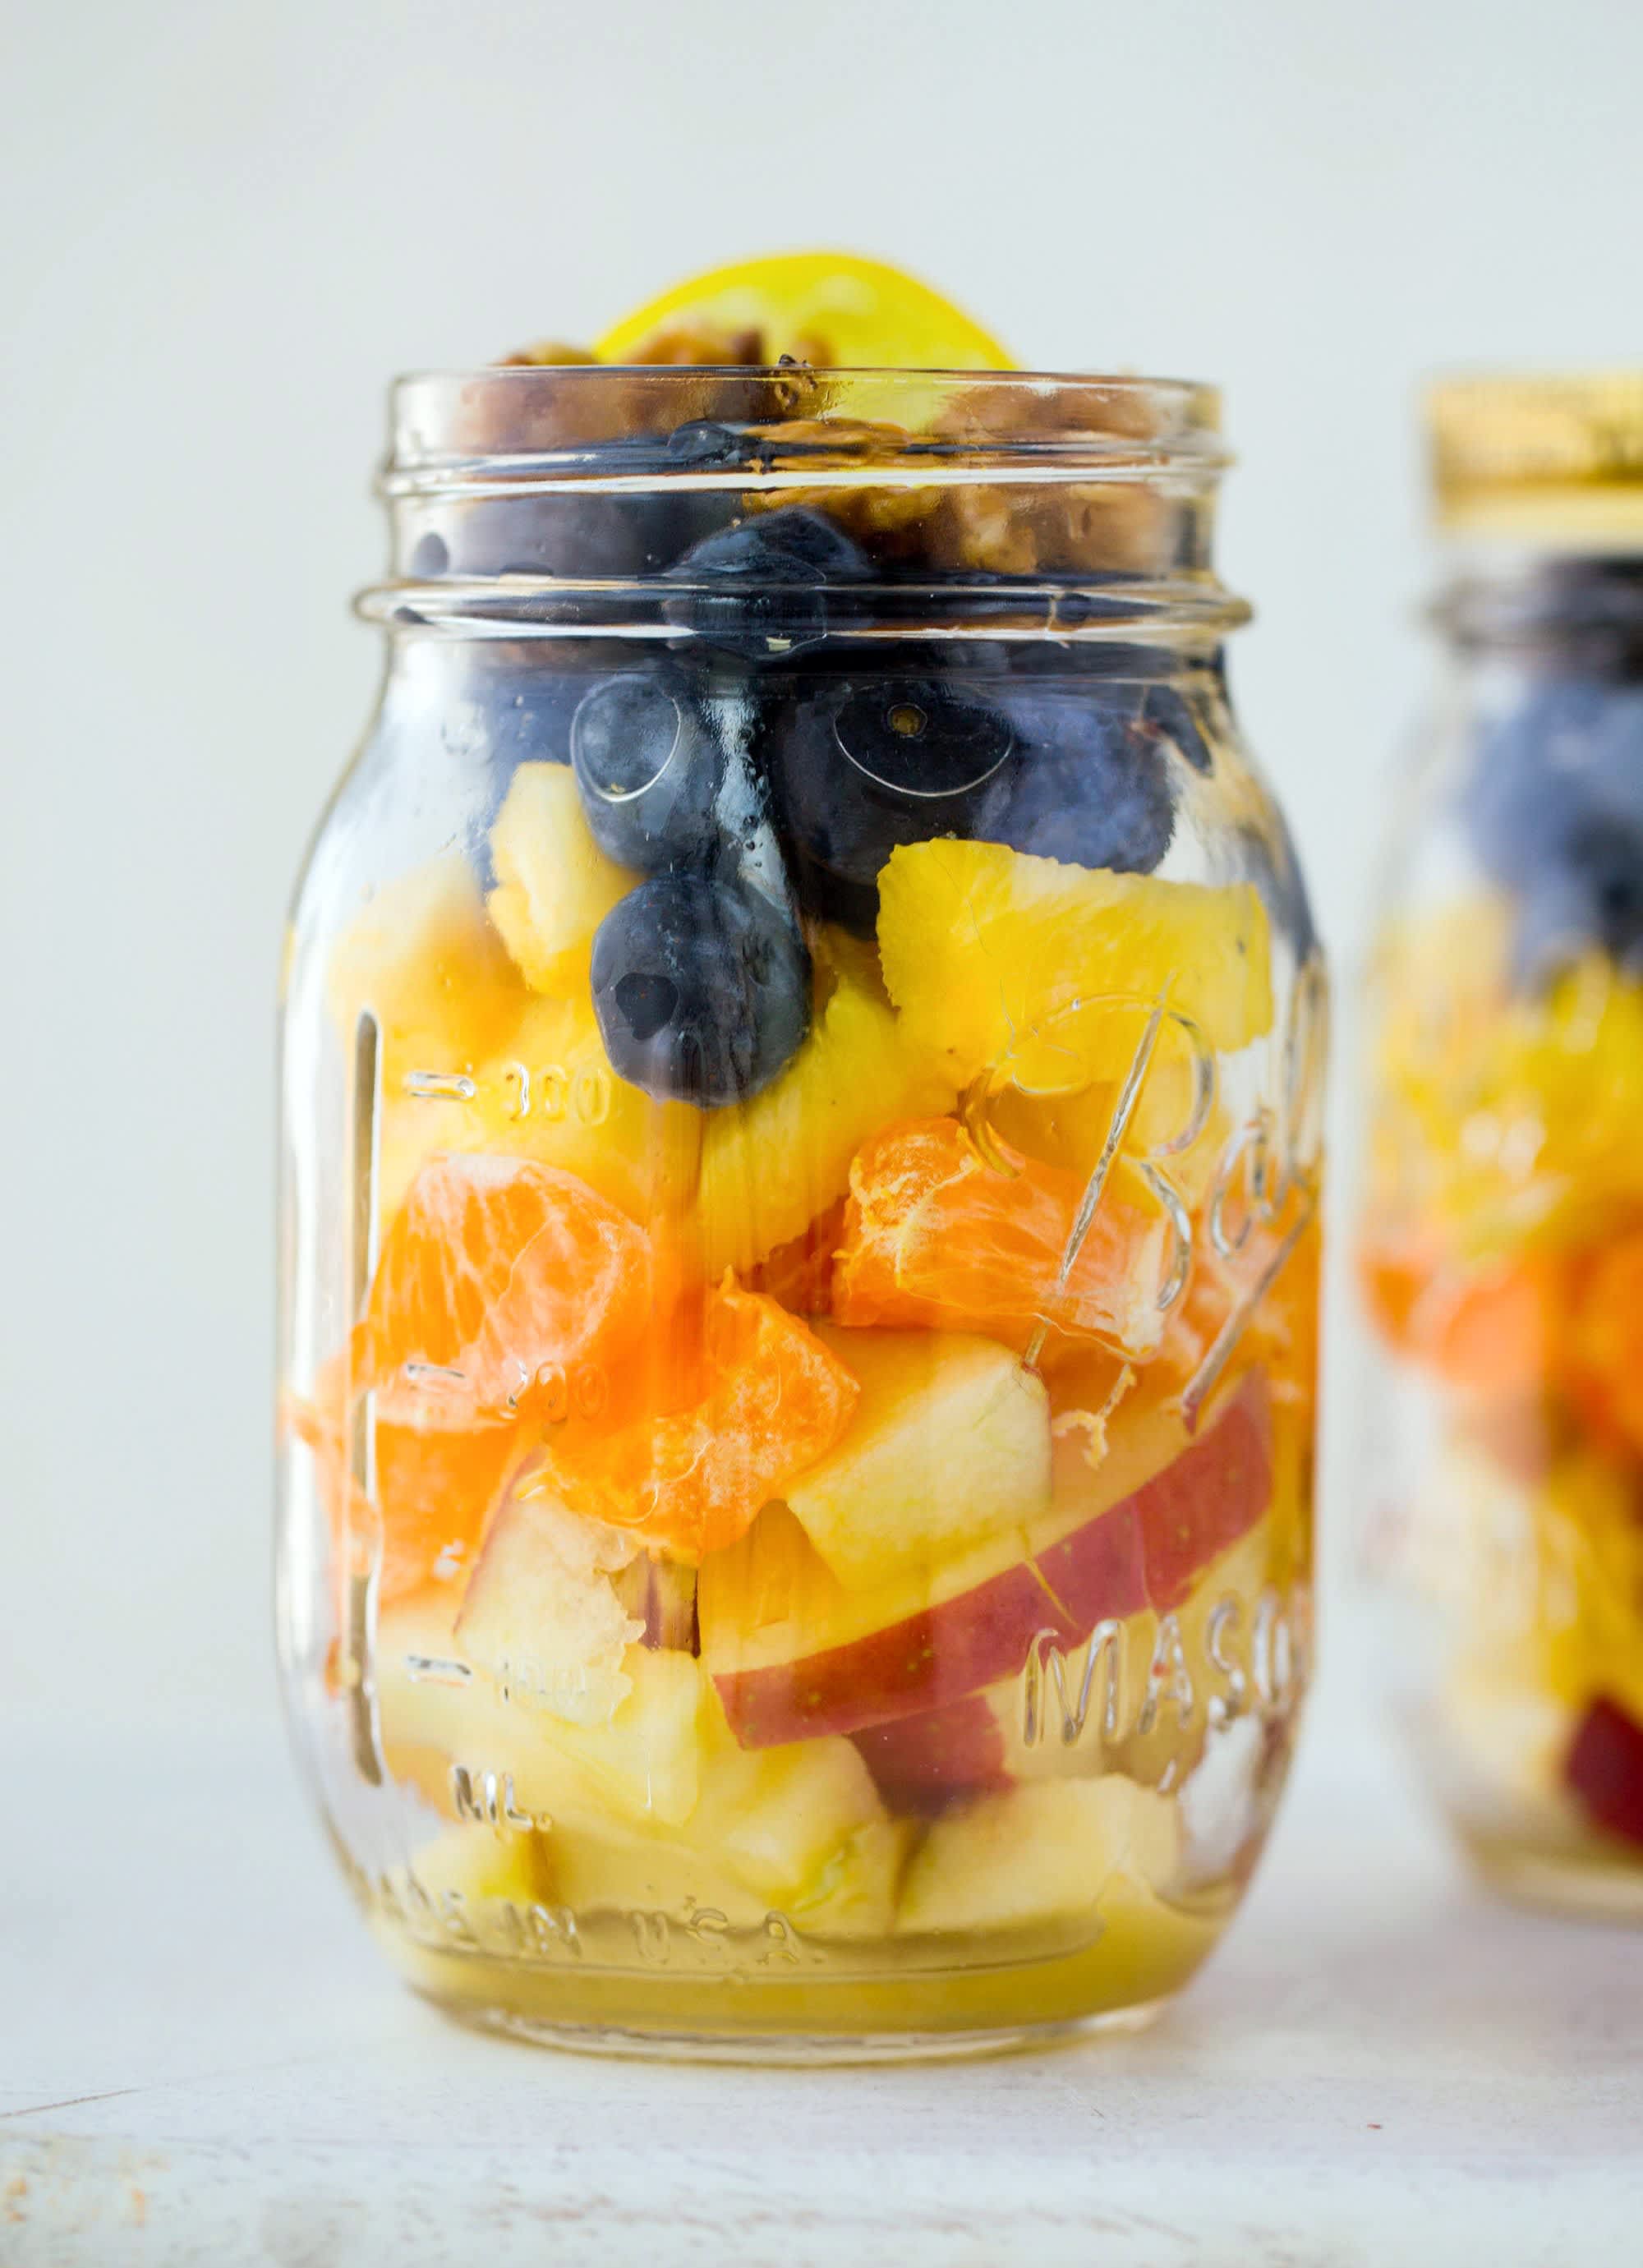 How to Make Fruit Salad in a Jar for Busy Weeks